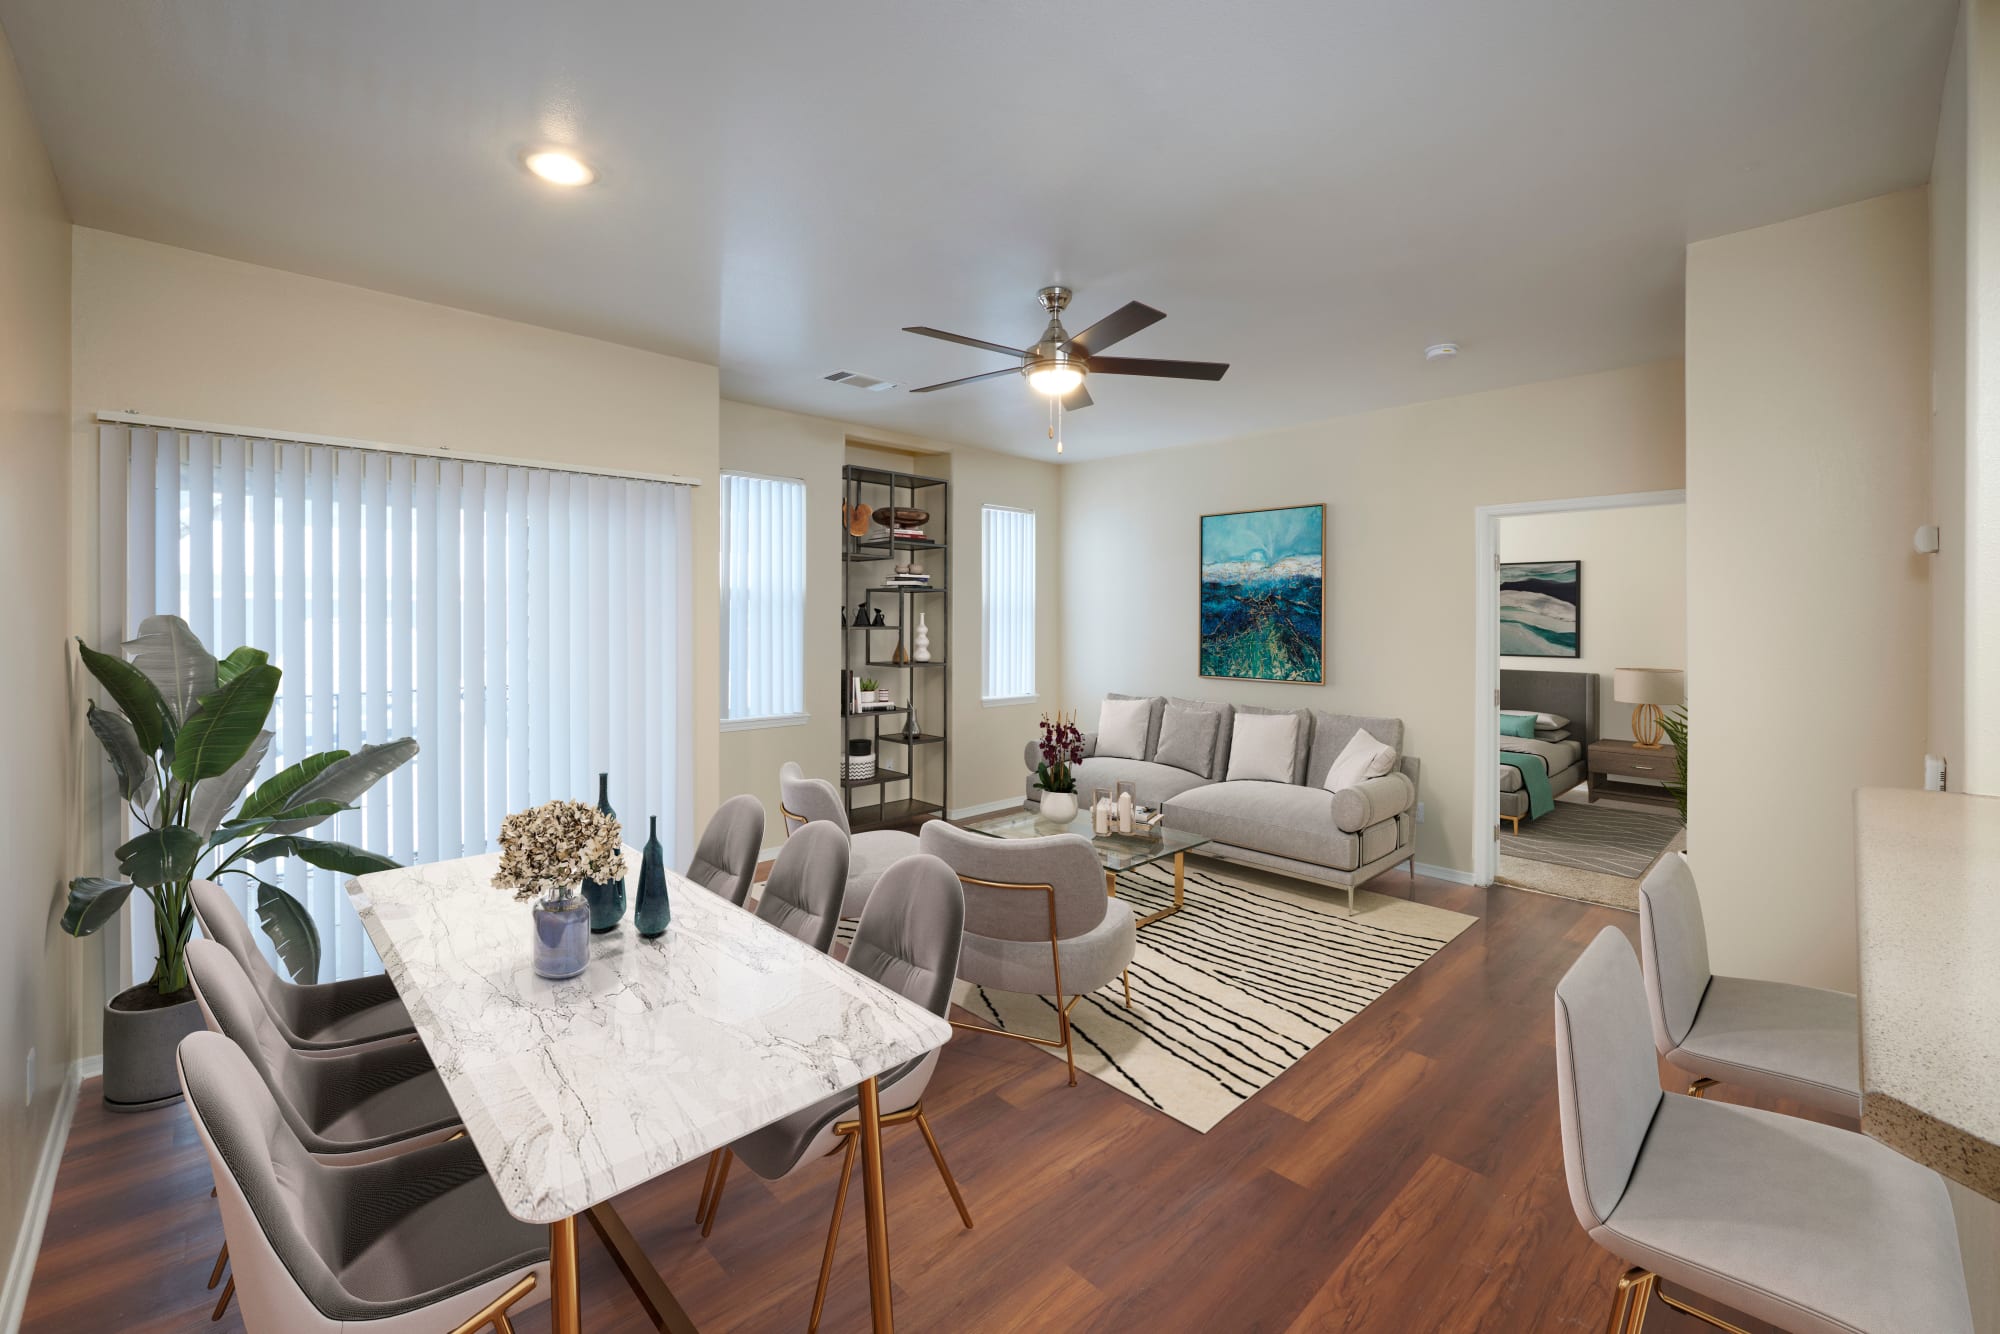 Well decorated model living room at Promenade at Hunter's Glen Apartments in Thornton, Colorado